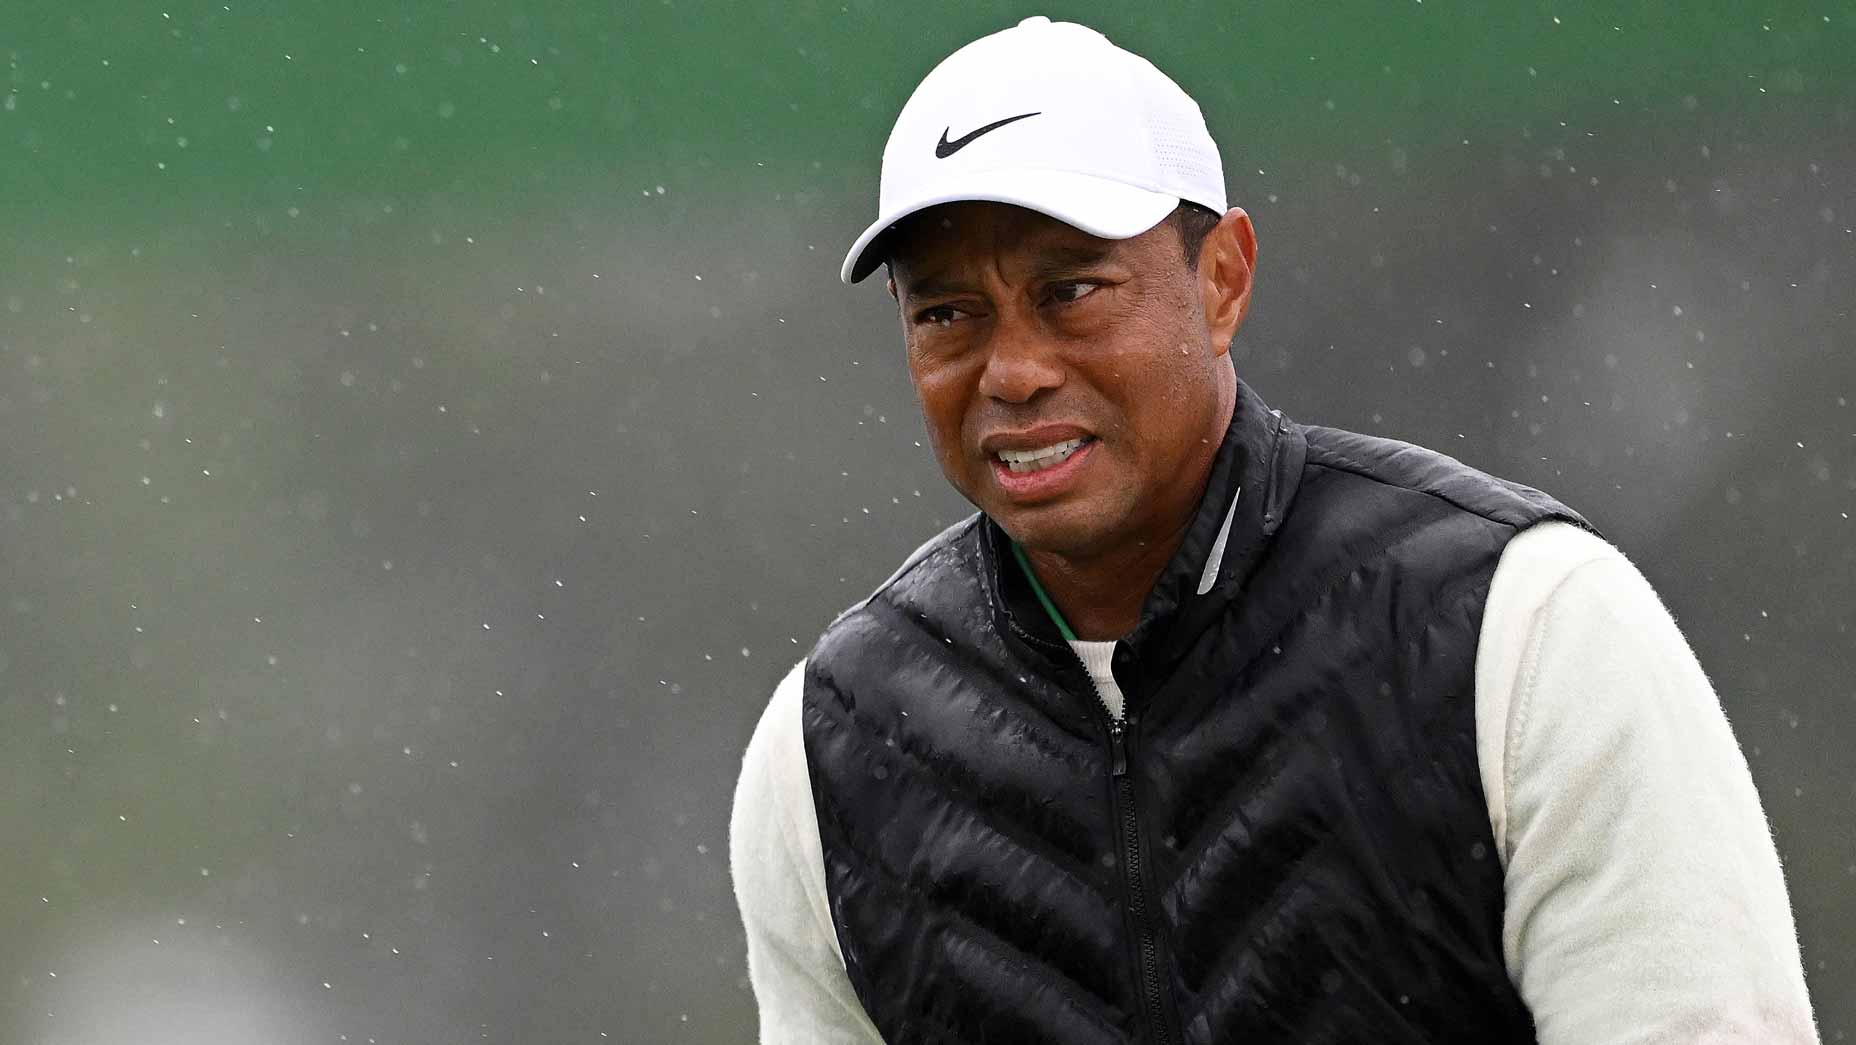 Tiger Woods withdraws from Masters with injury after matching record